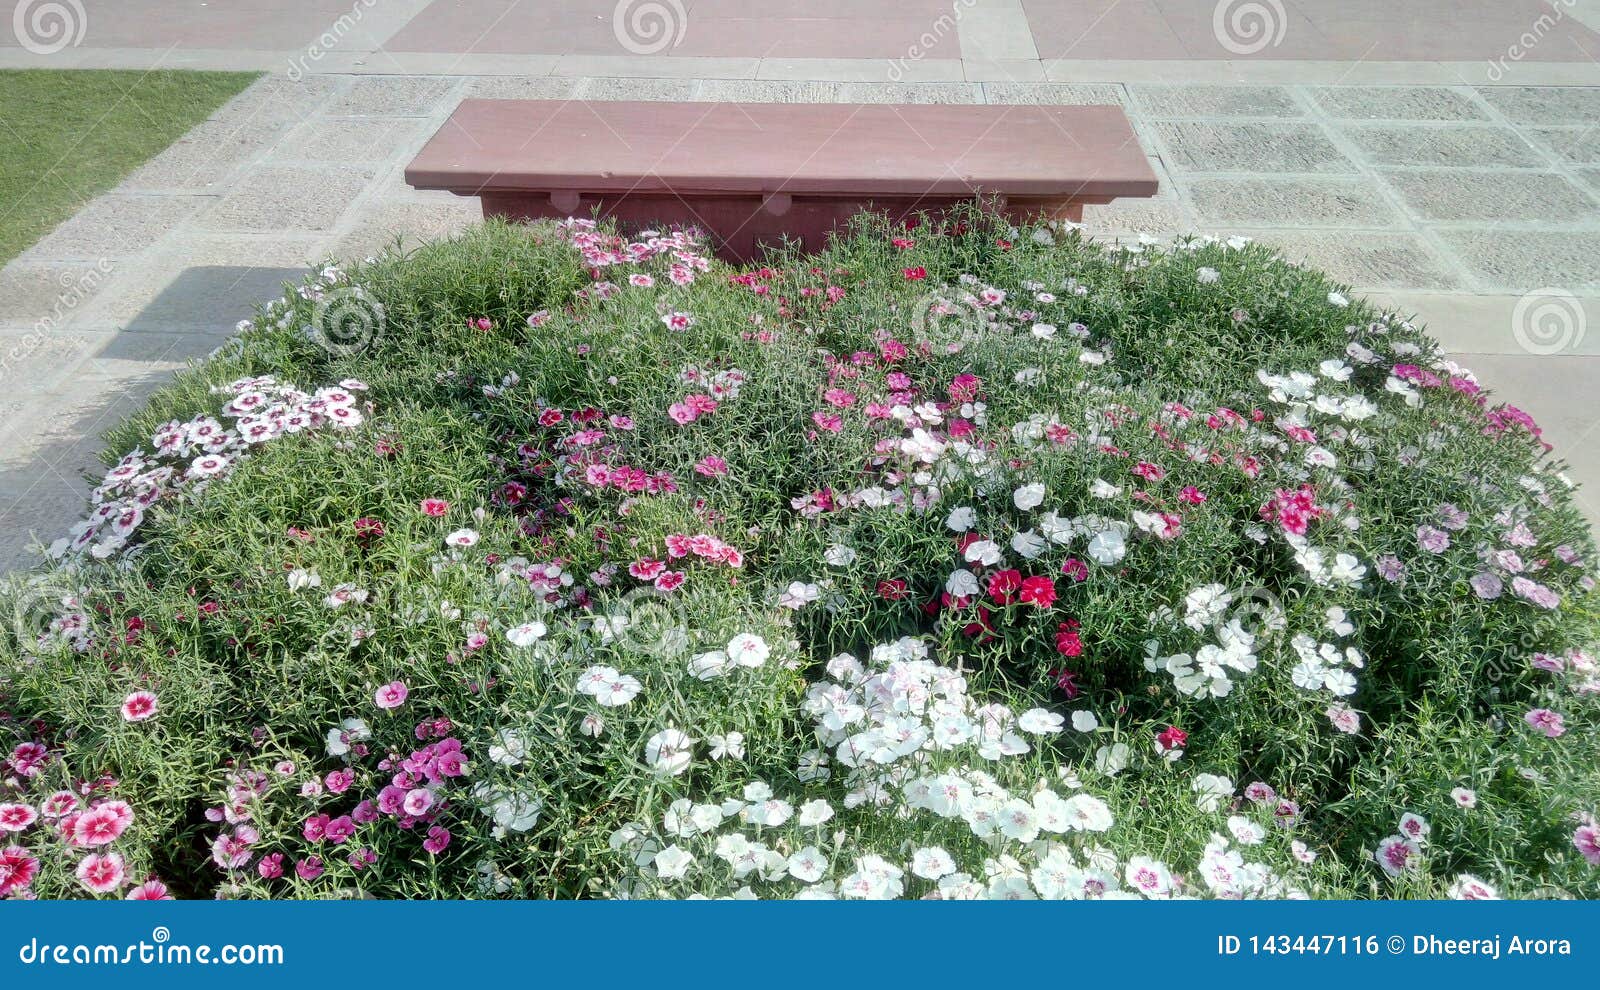 Bench Behind Colorful Spring Flowers In A Garden In New Delhi India Stock Photo Image Of Spring Green 143447116